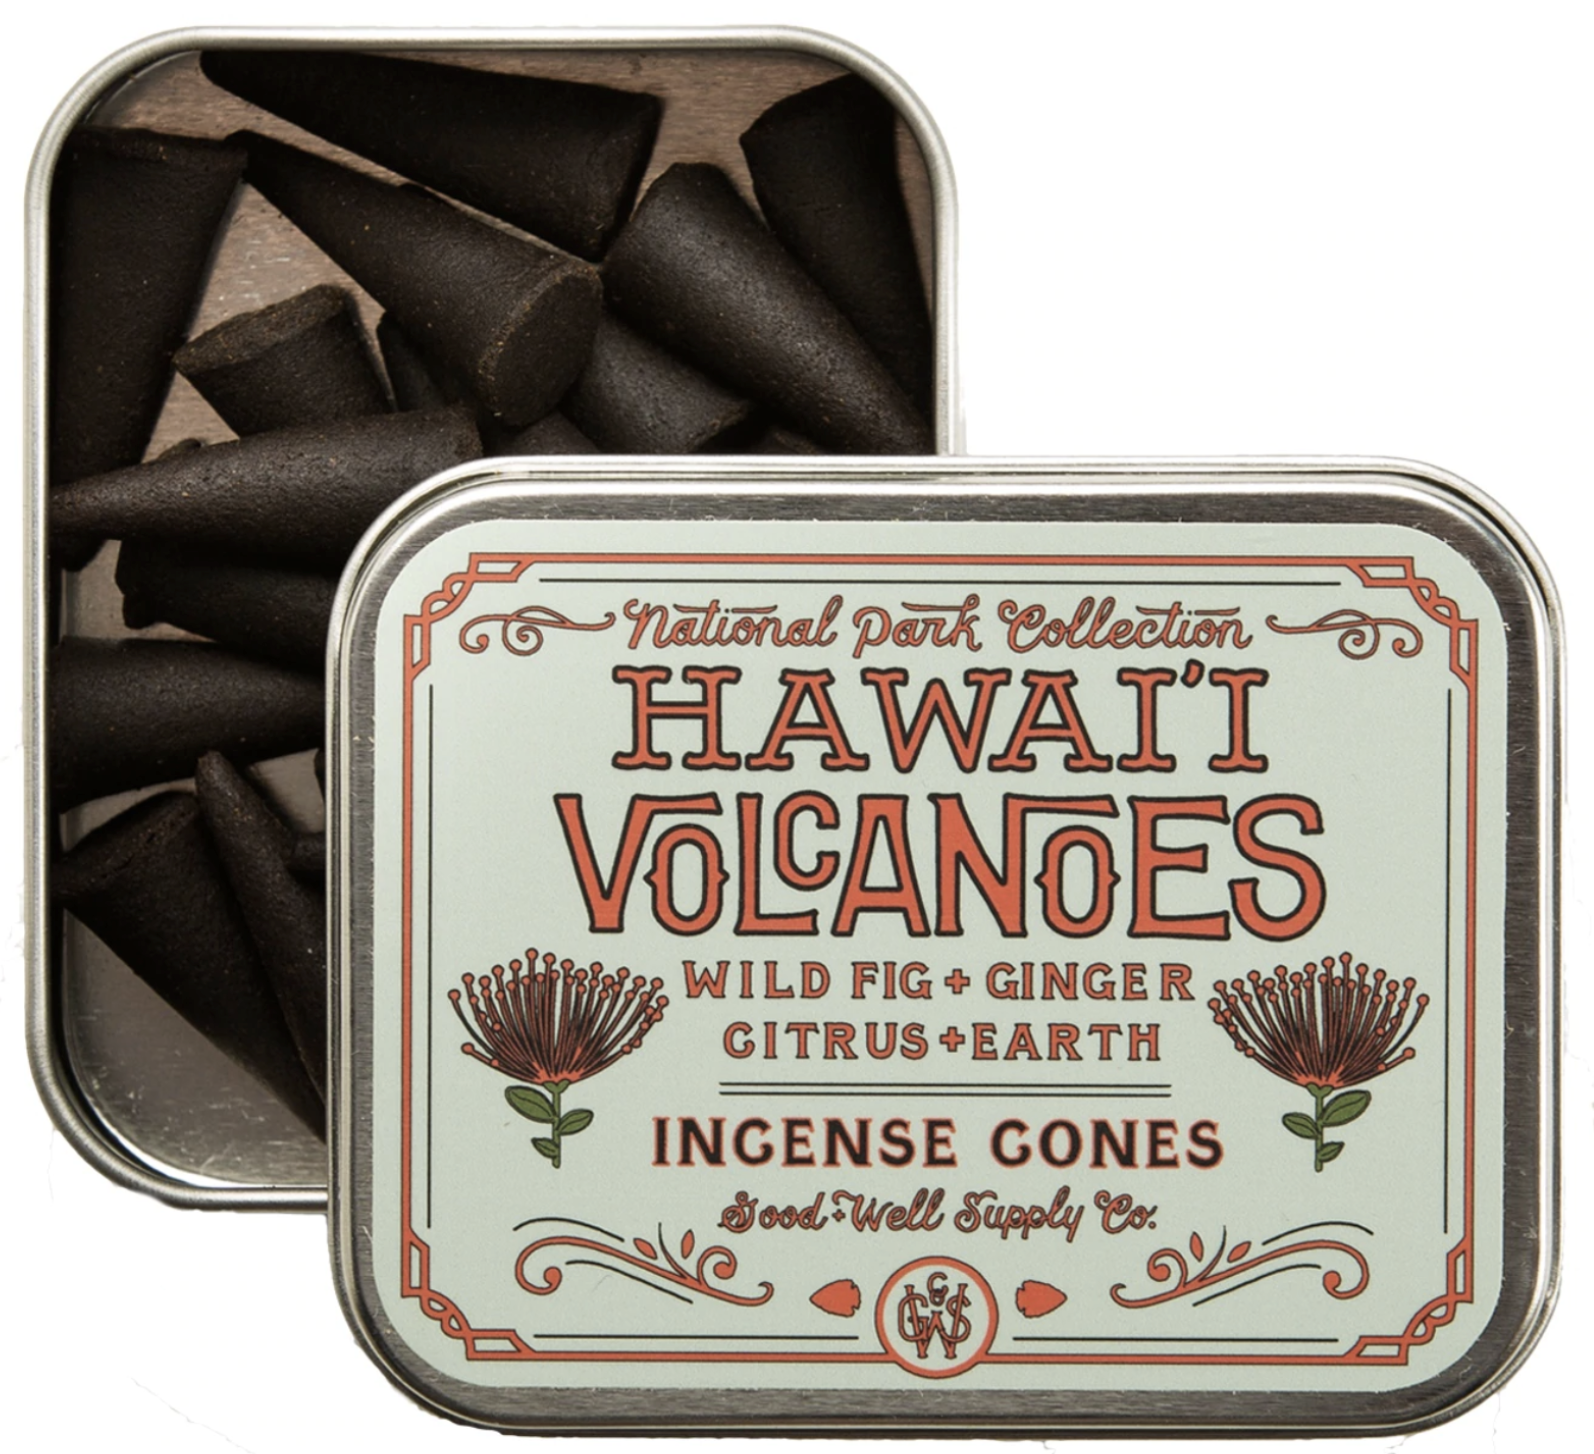 Good & Well Supply Co: Hawai'i Incense - wild fig, ginger & citrus